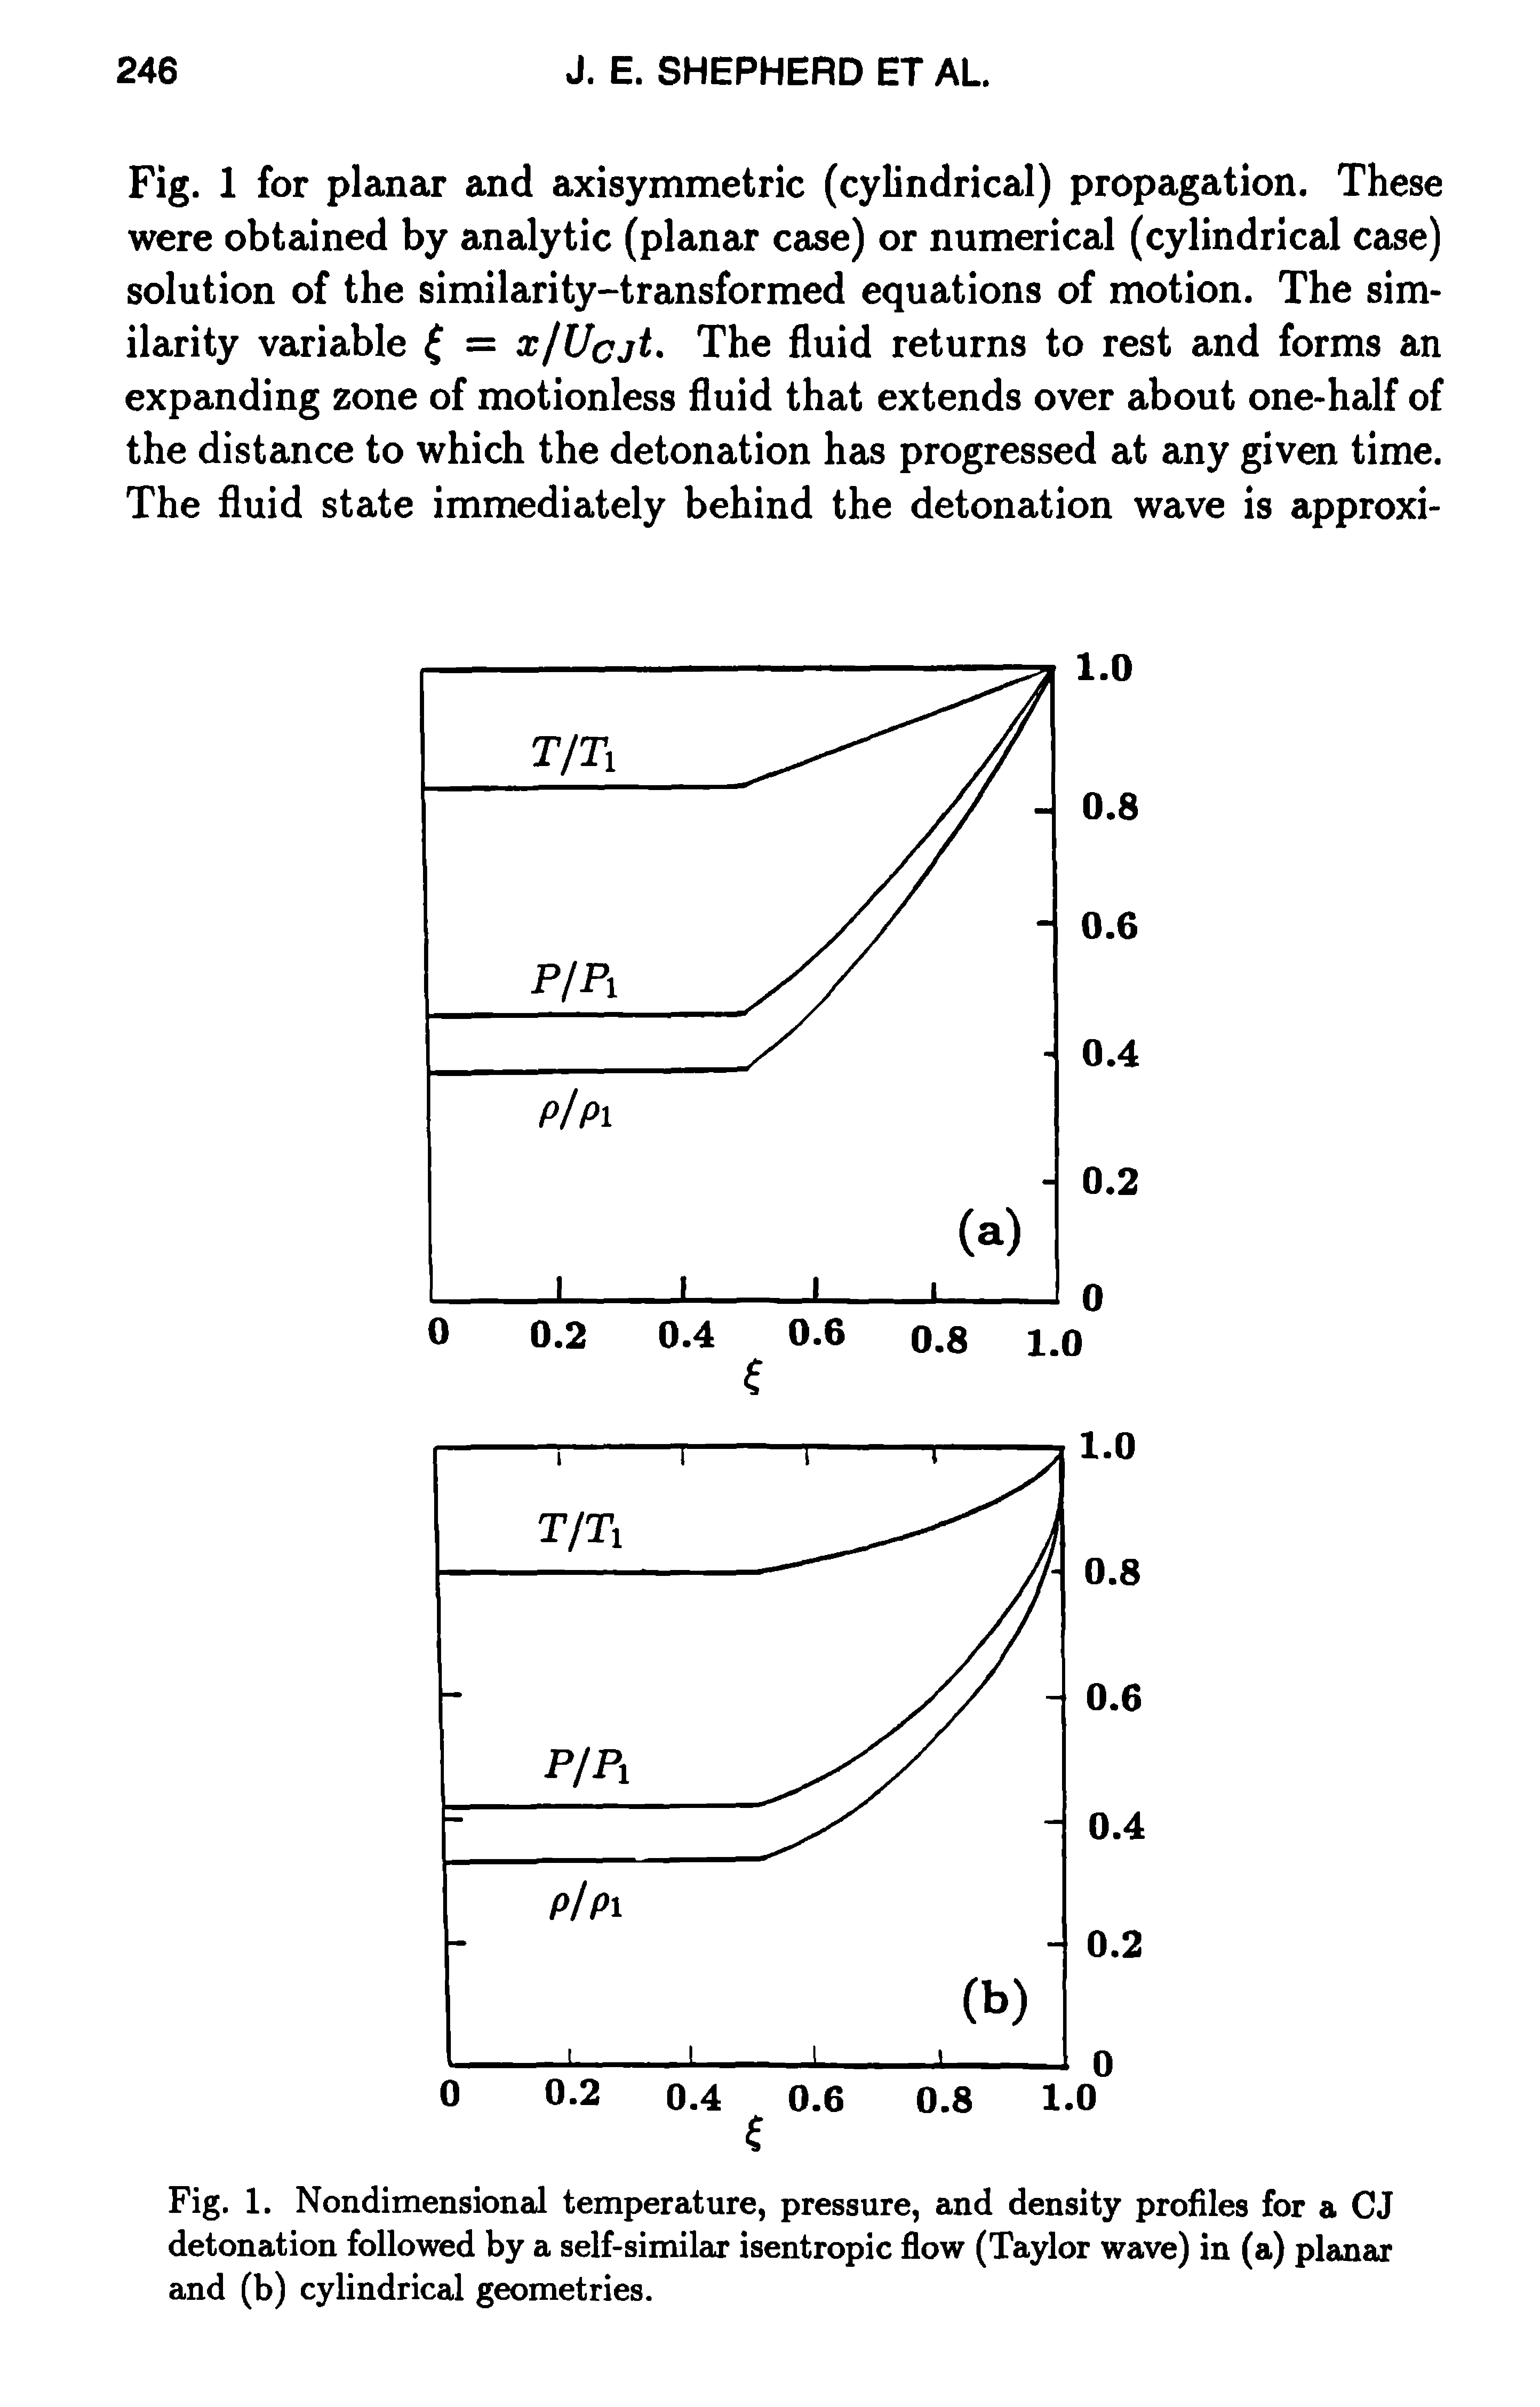 Fig. 1. Nondimensional temperature, pressure, and density profiles for a CJ detonation followed by a self-similar isentropic flow (Taylor wave) in (a) planar and (b) cylindrical geometries.